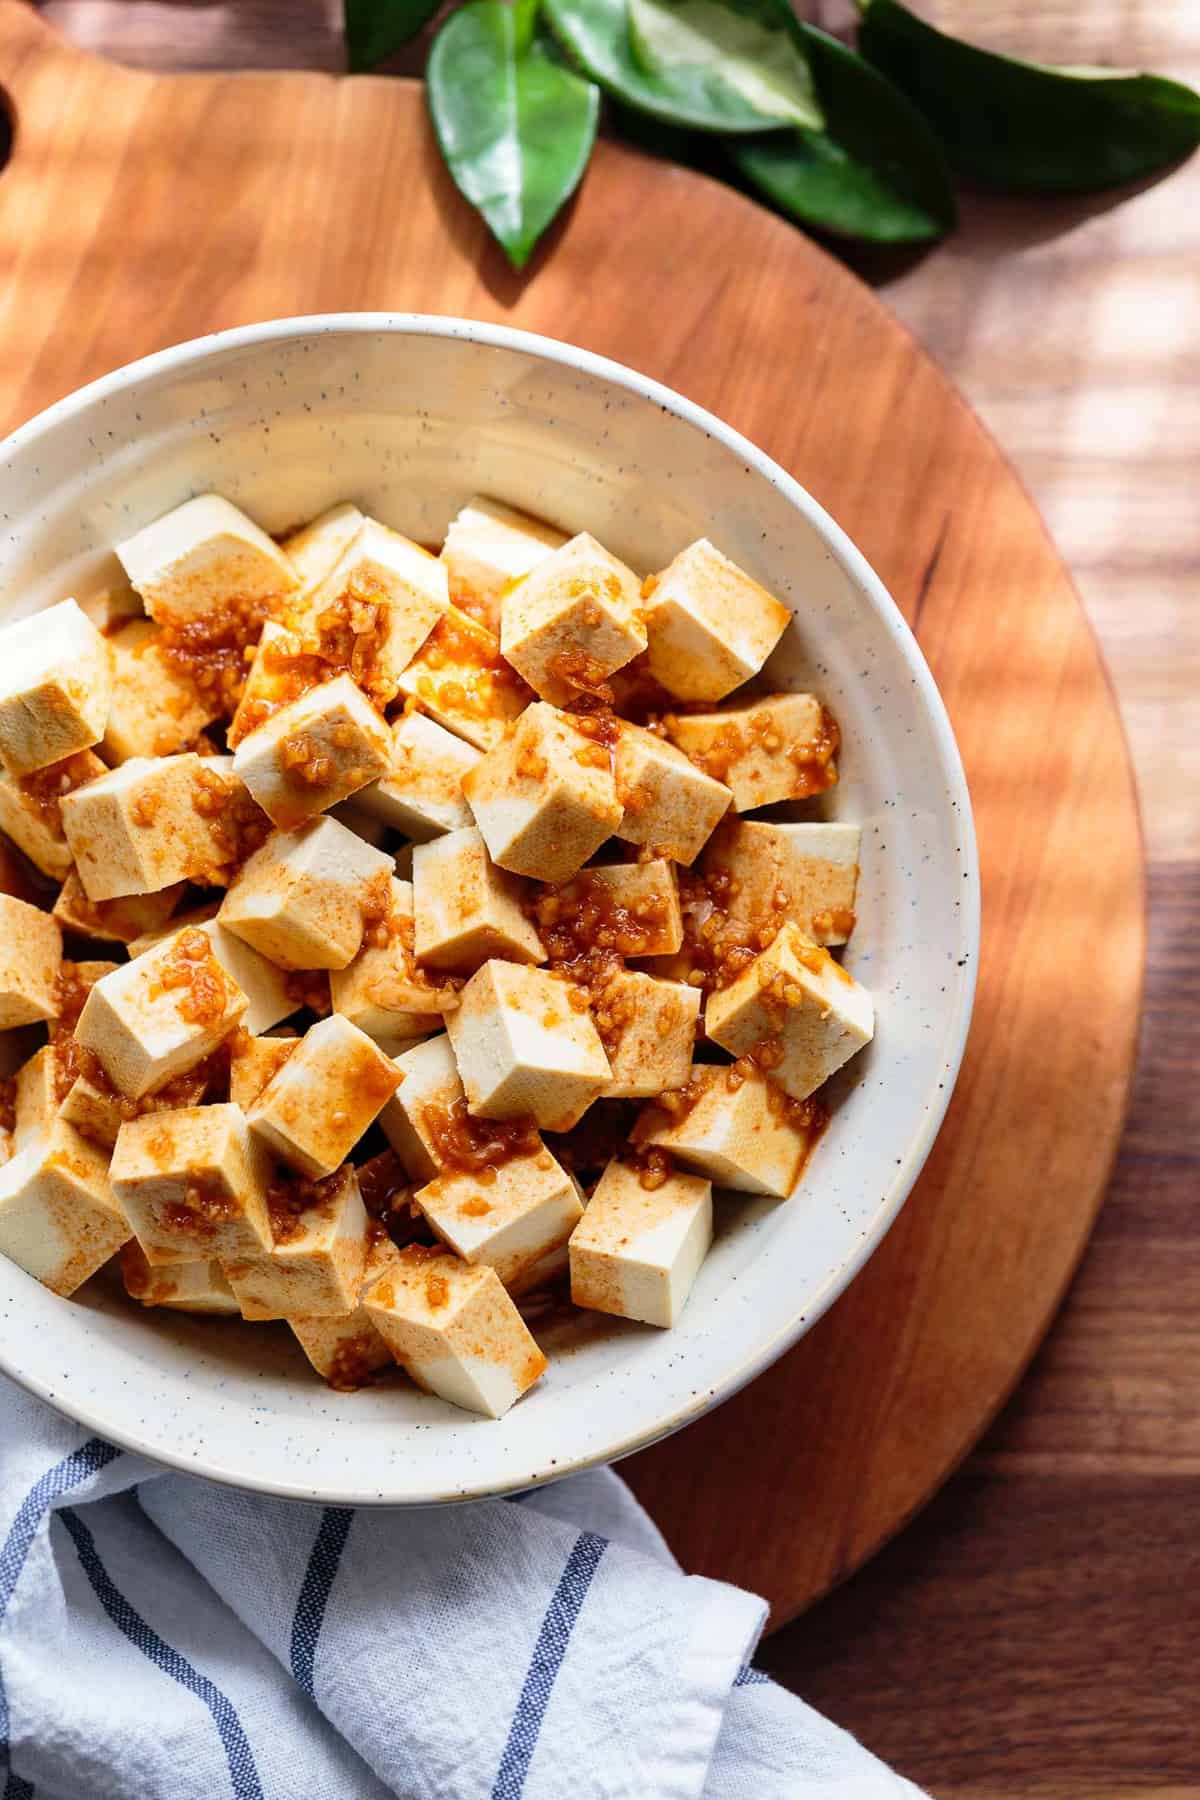 Extra-firm tofu cubes in a soy sauce, sriracha, sesame oil, and garlic marinade.